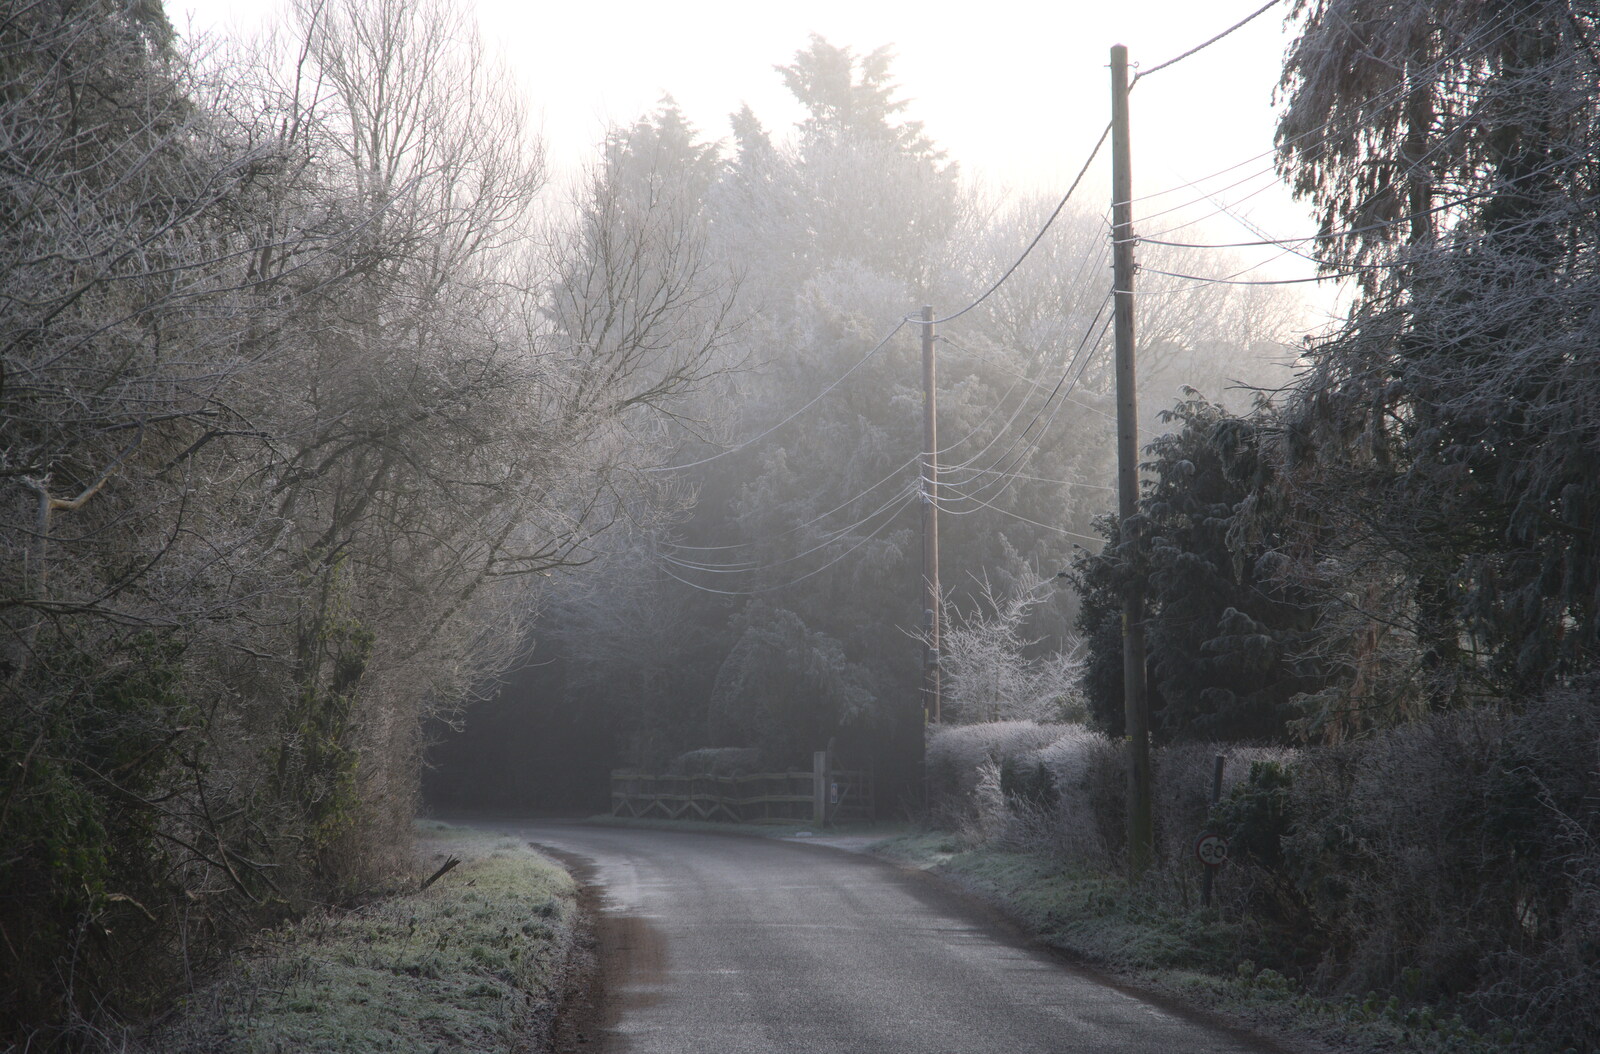 A Frosty Walk Around Brome, Suffolk - 22nd January 2023: Rectory Road in Brome, near the church